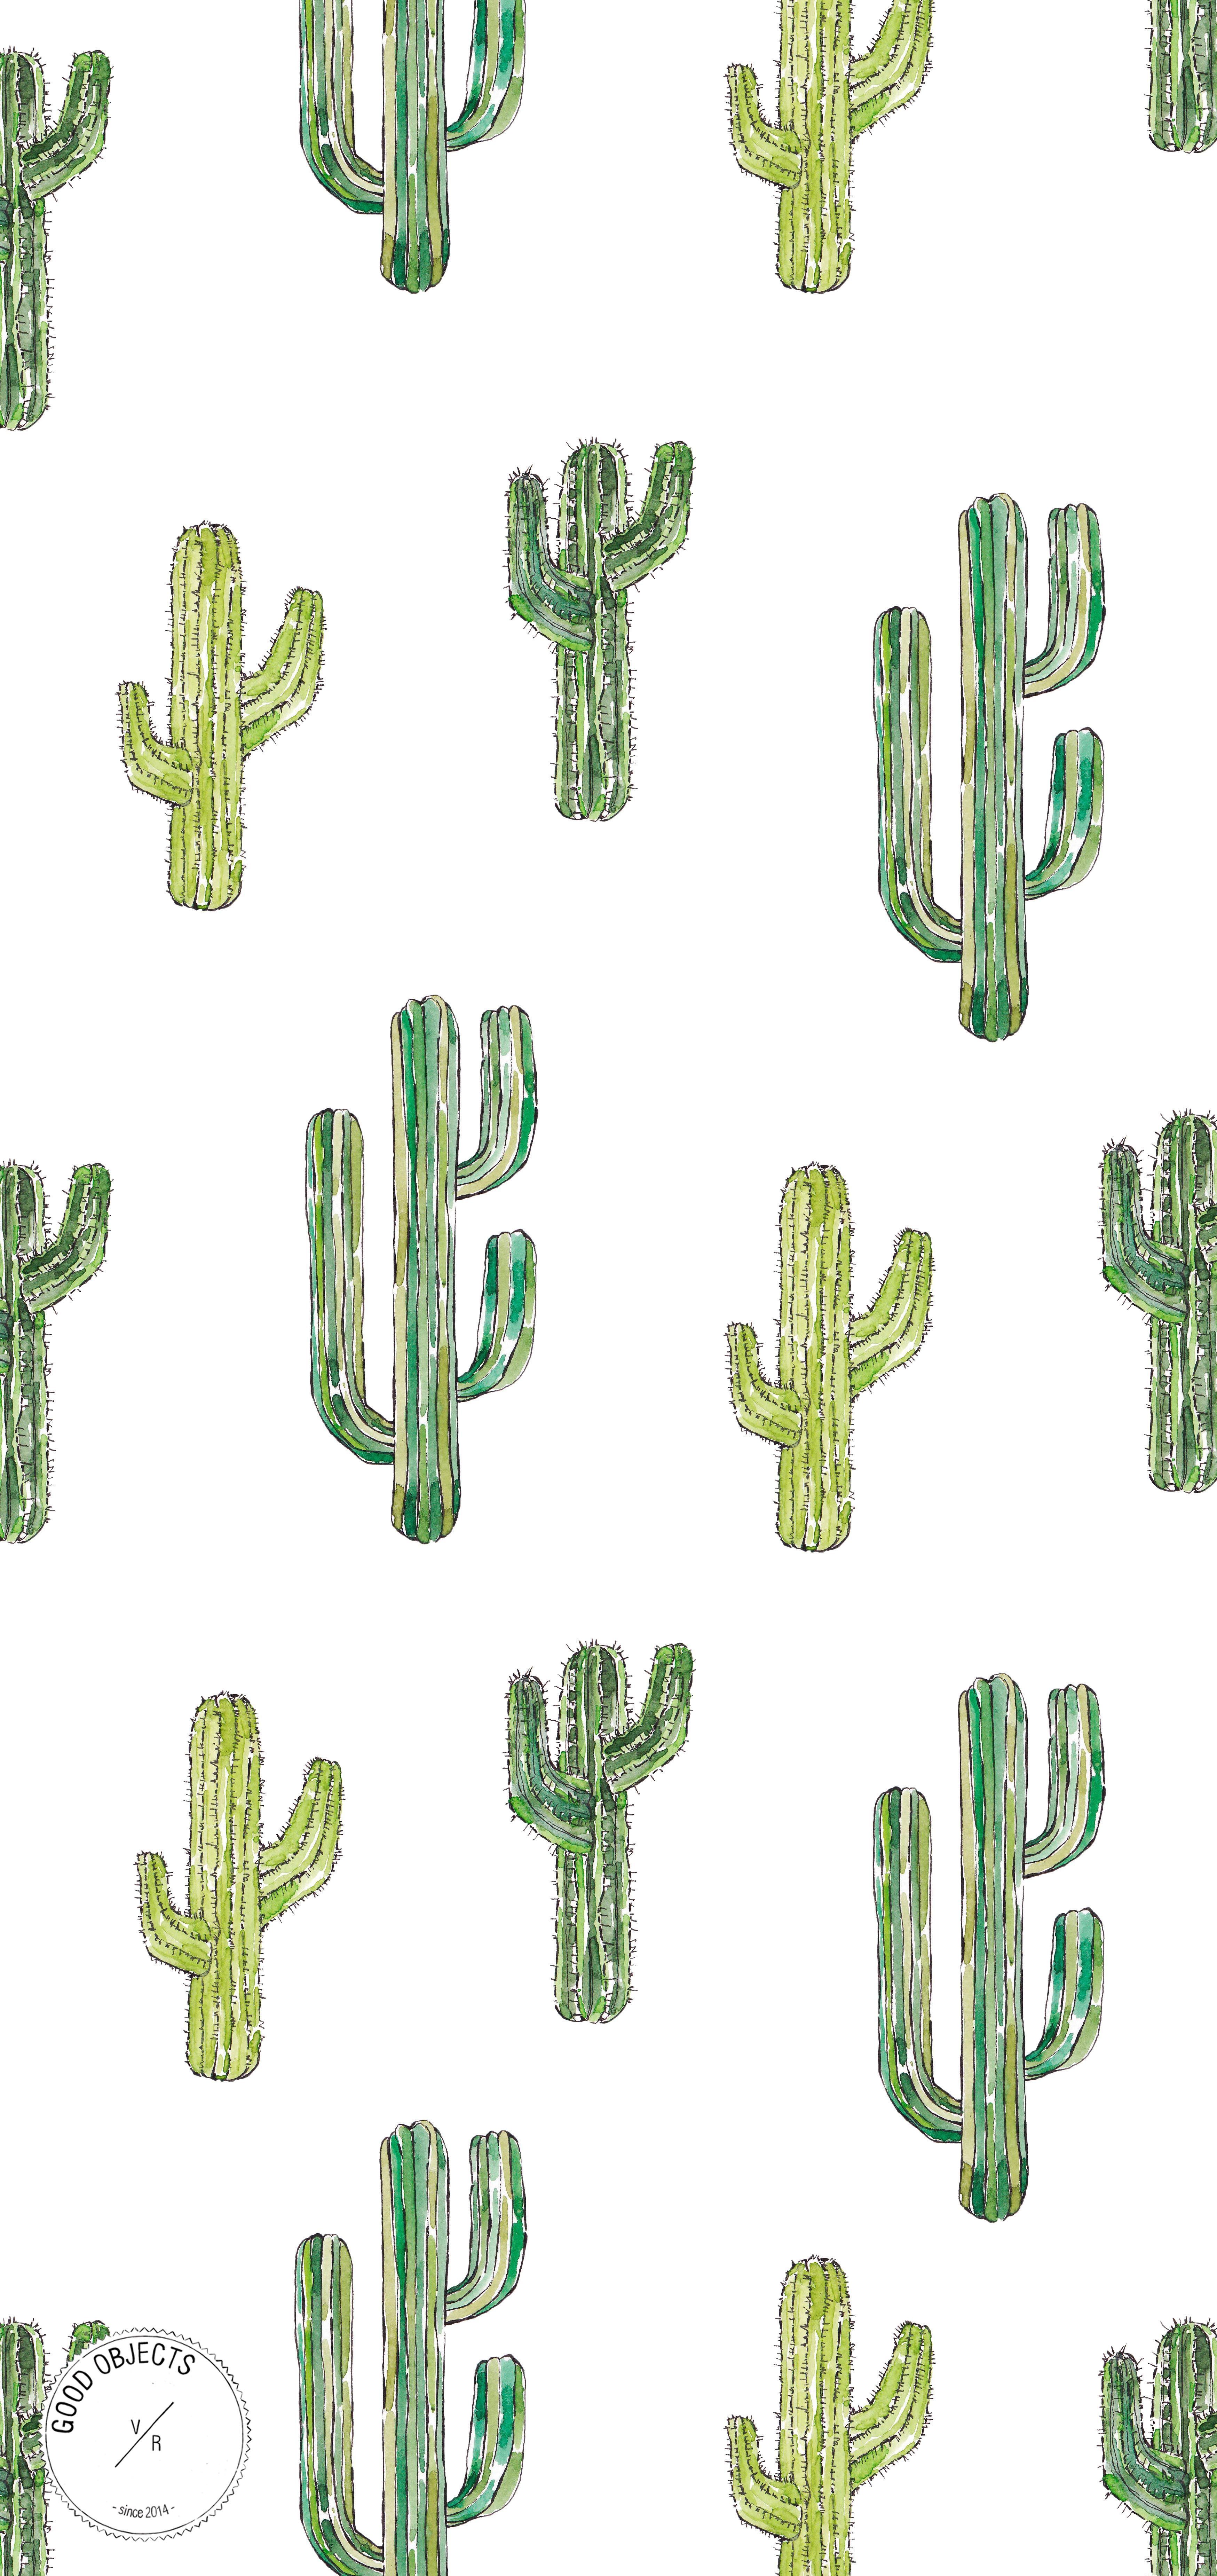 SHOP NOW ! Good objects watercolor art print The market in cactus house plants is booming and with v. Watercolor art prints, Watercolor cactus, Cactus